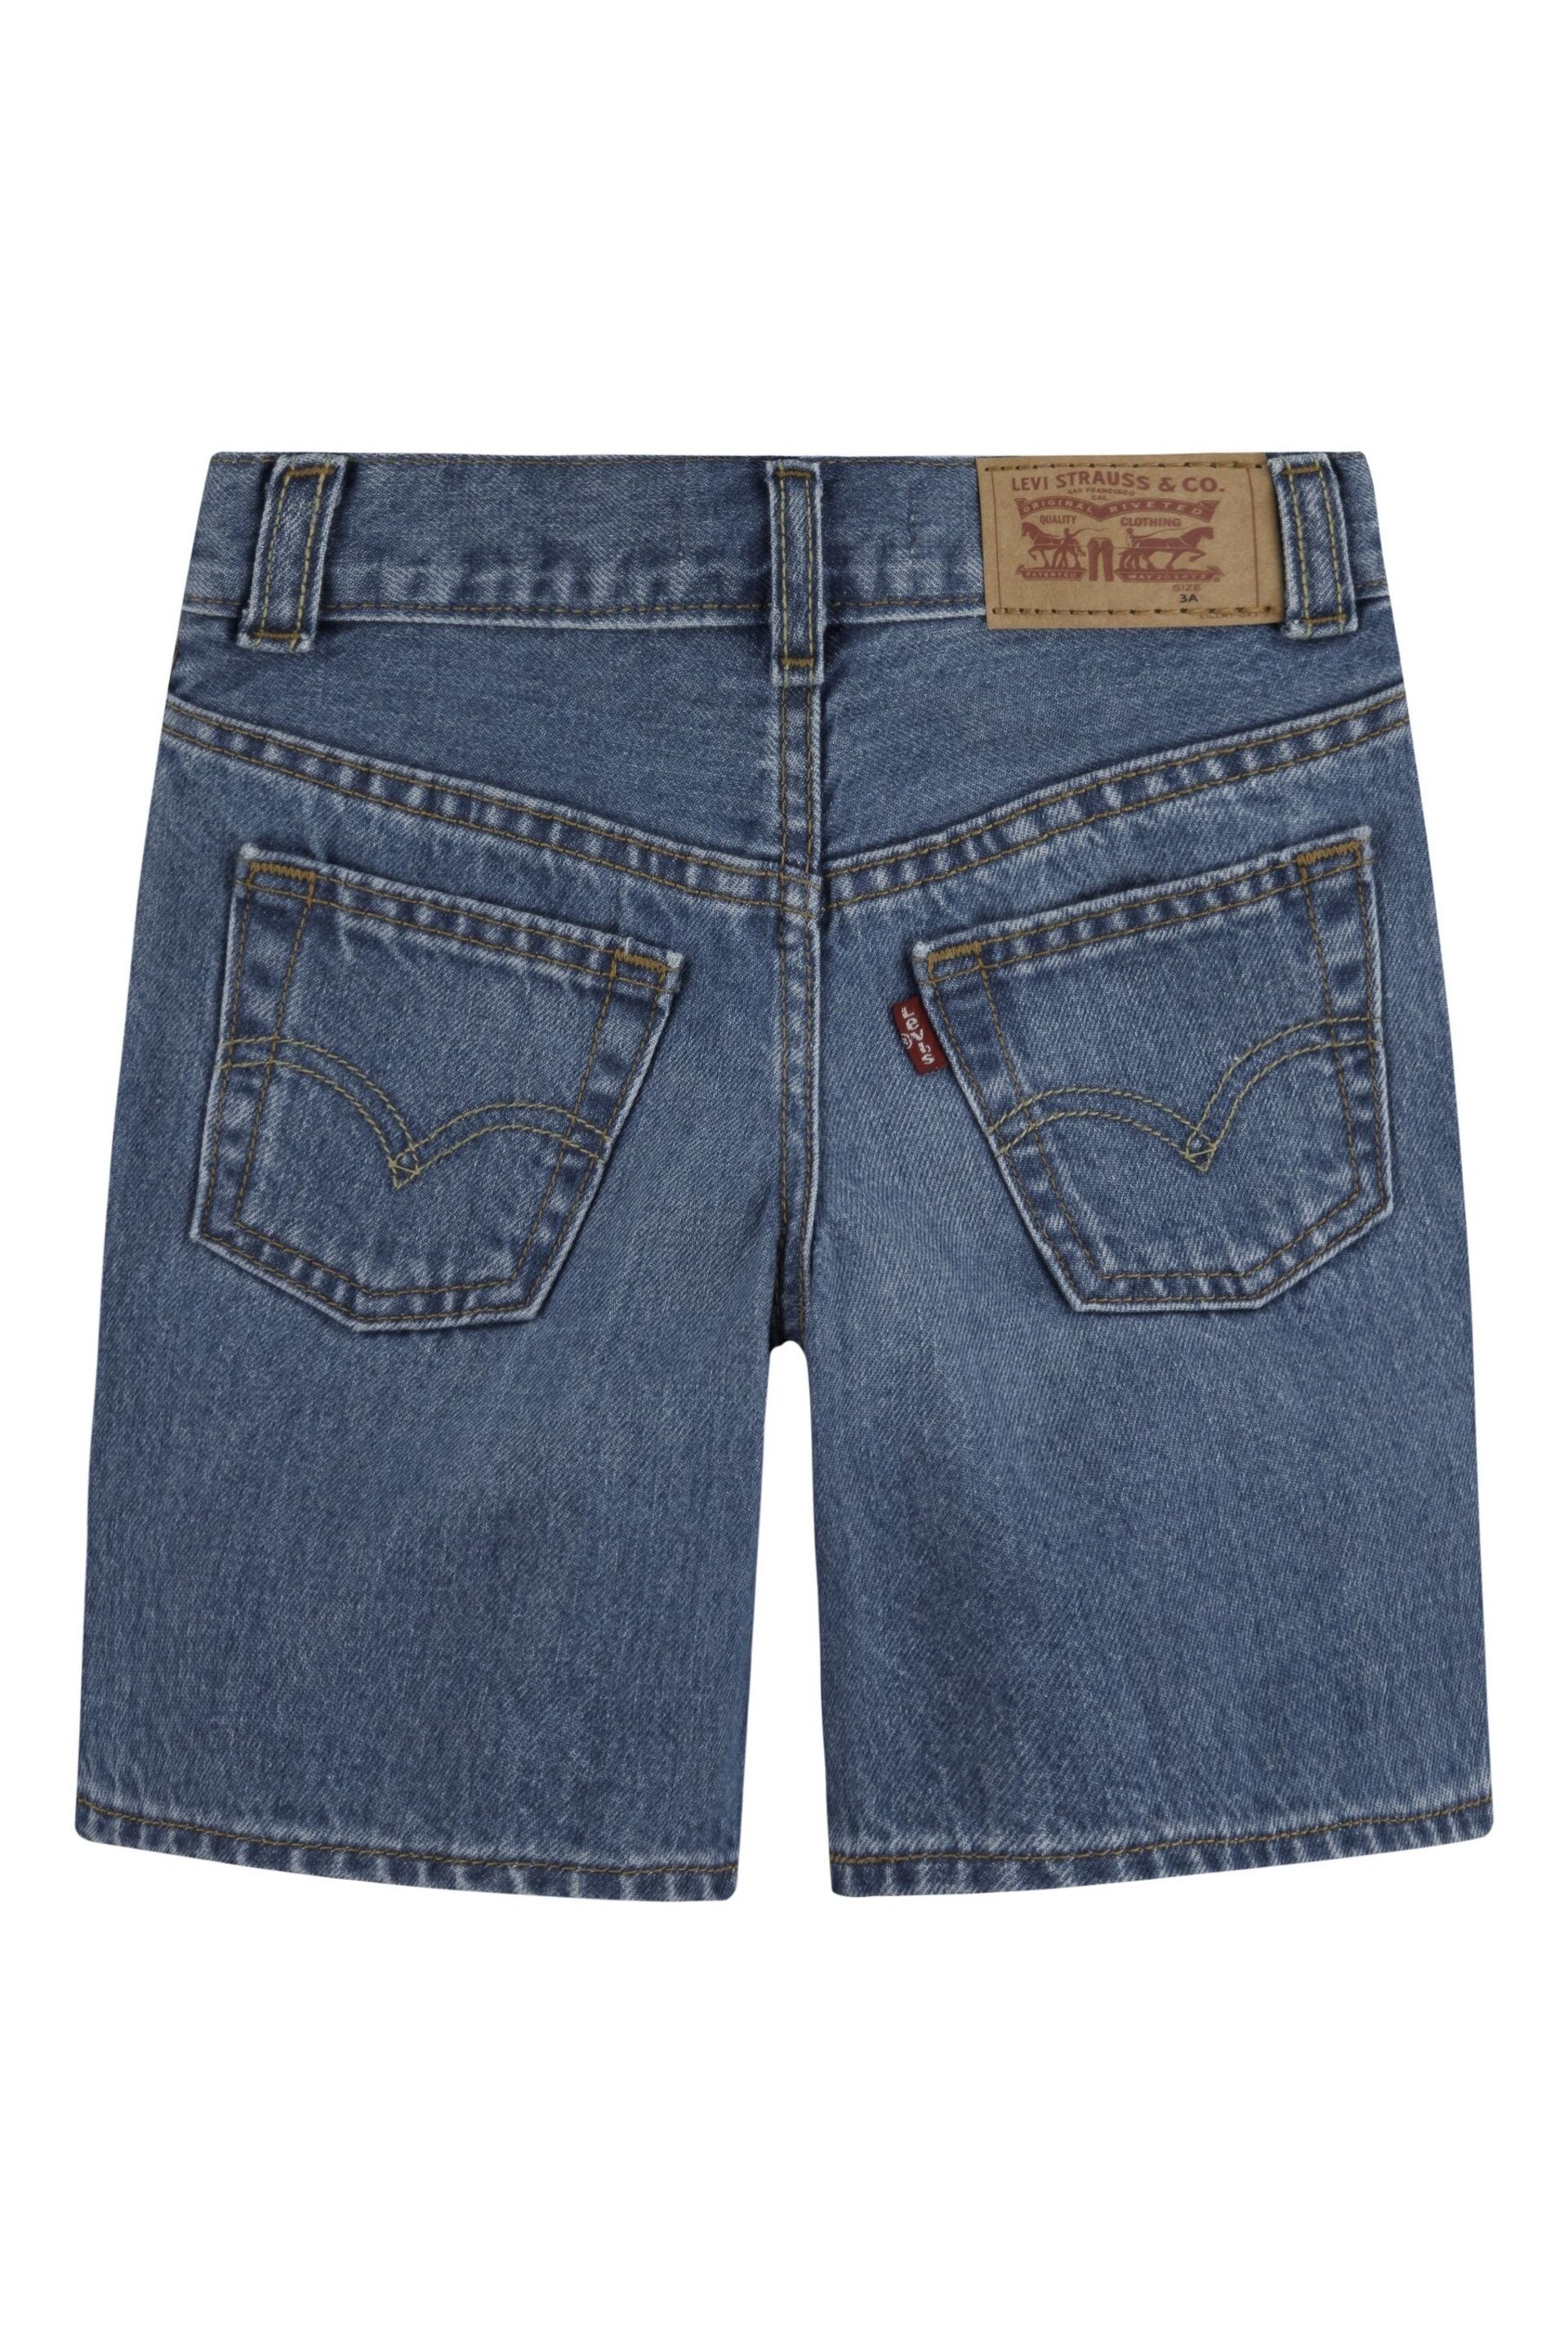 Levi's® Blue Relaxed Fit Skater Shorts - Image 2 of 4